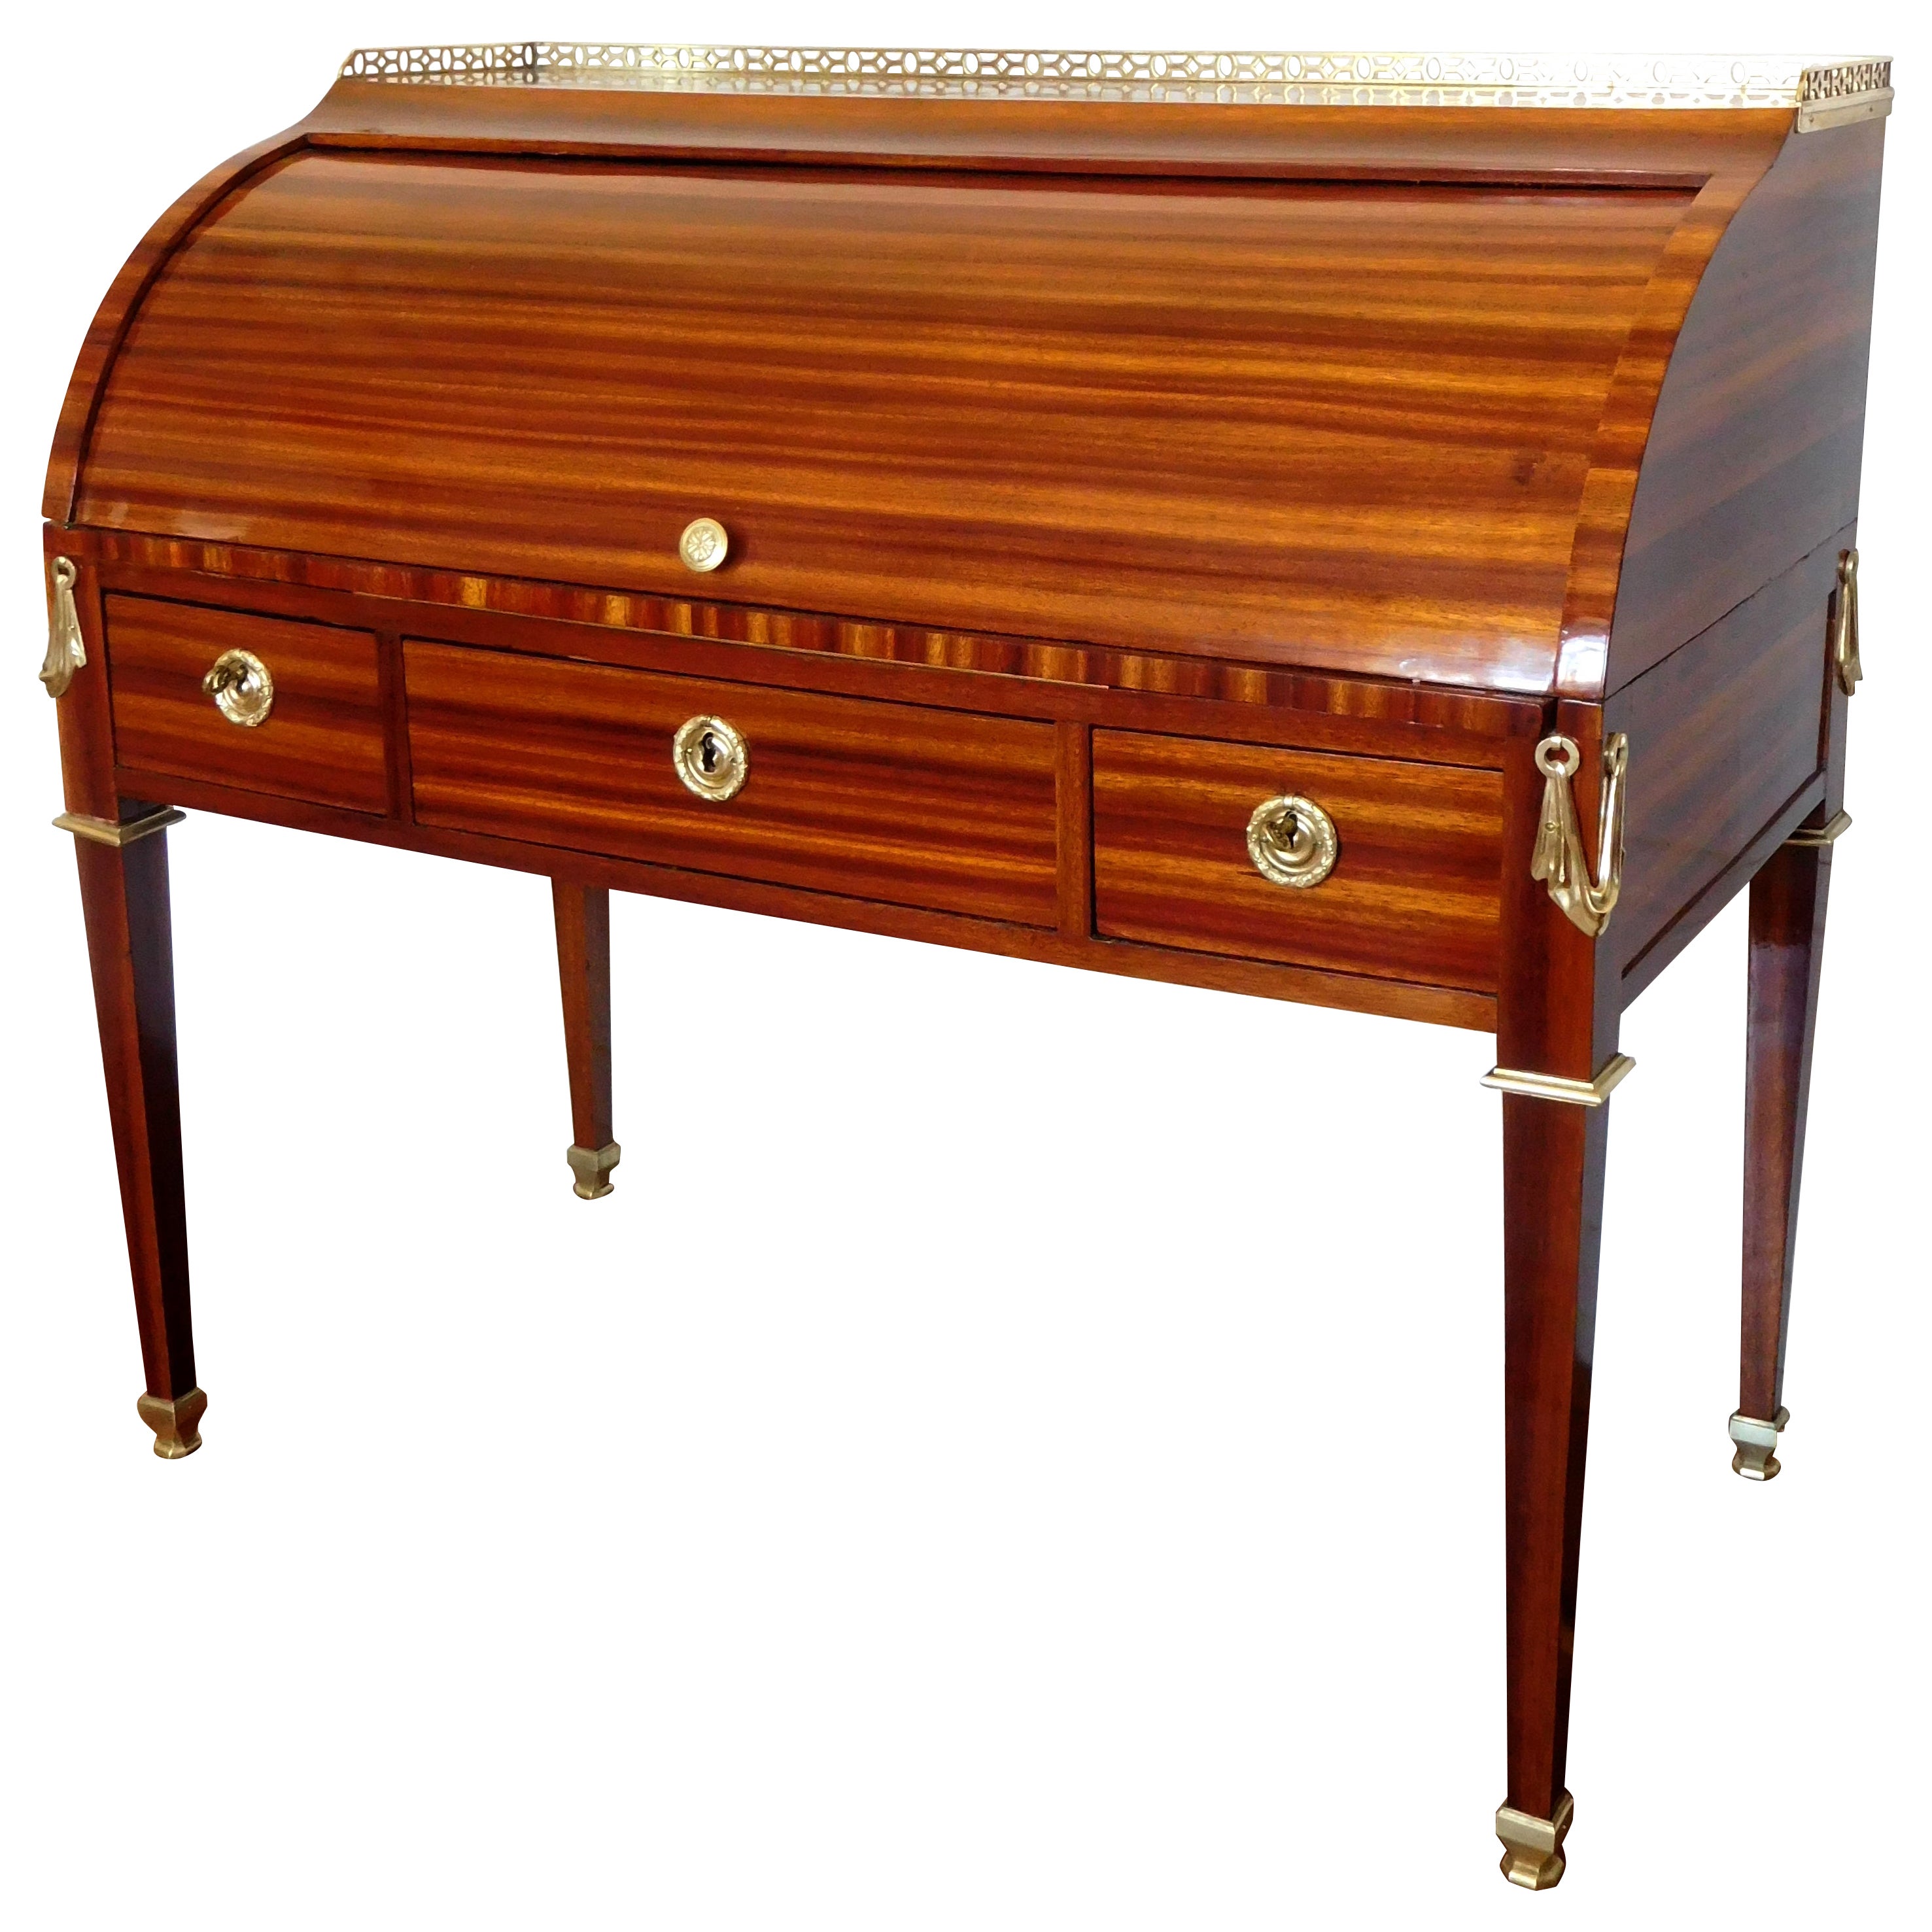 Louis XVI Satinwood Roll Top Desk by Macret - Stamped - 18th Century circa 1780 For Sale